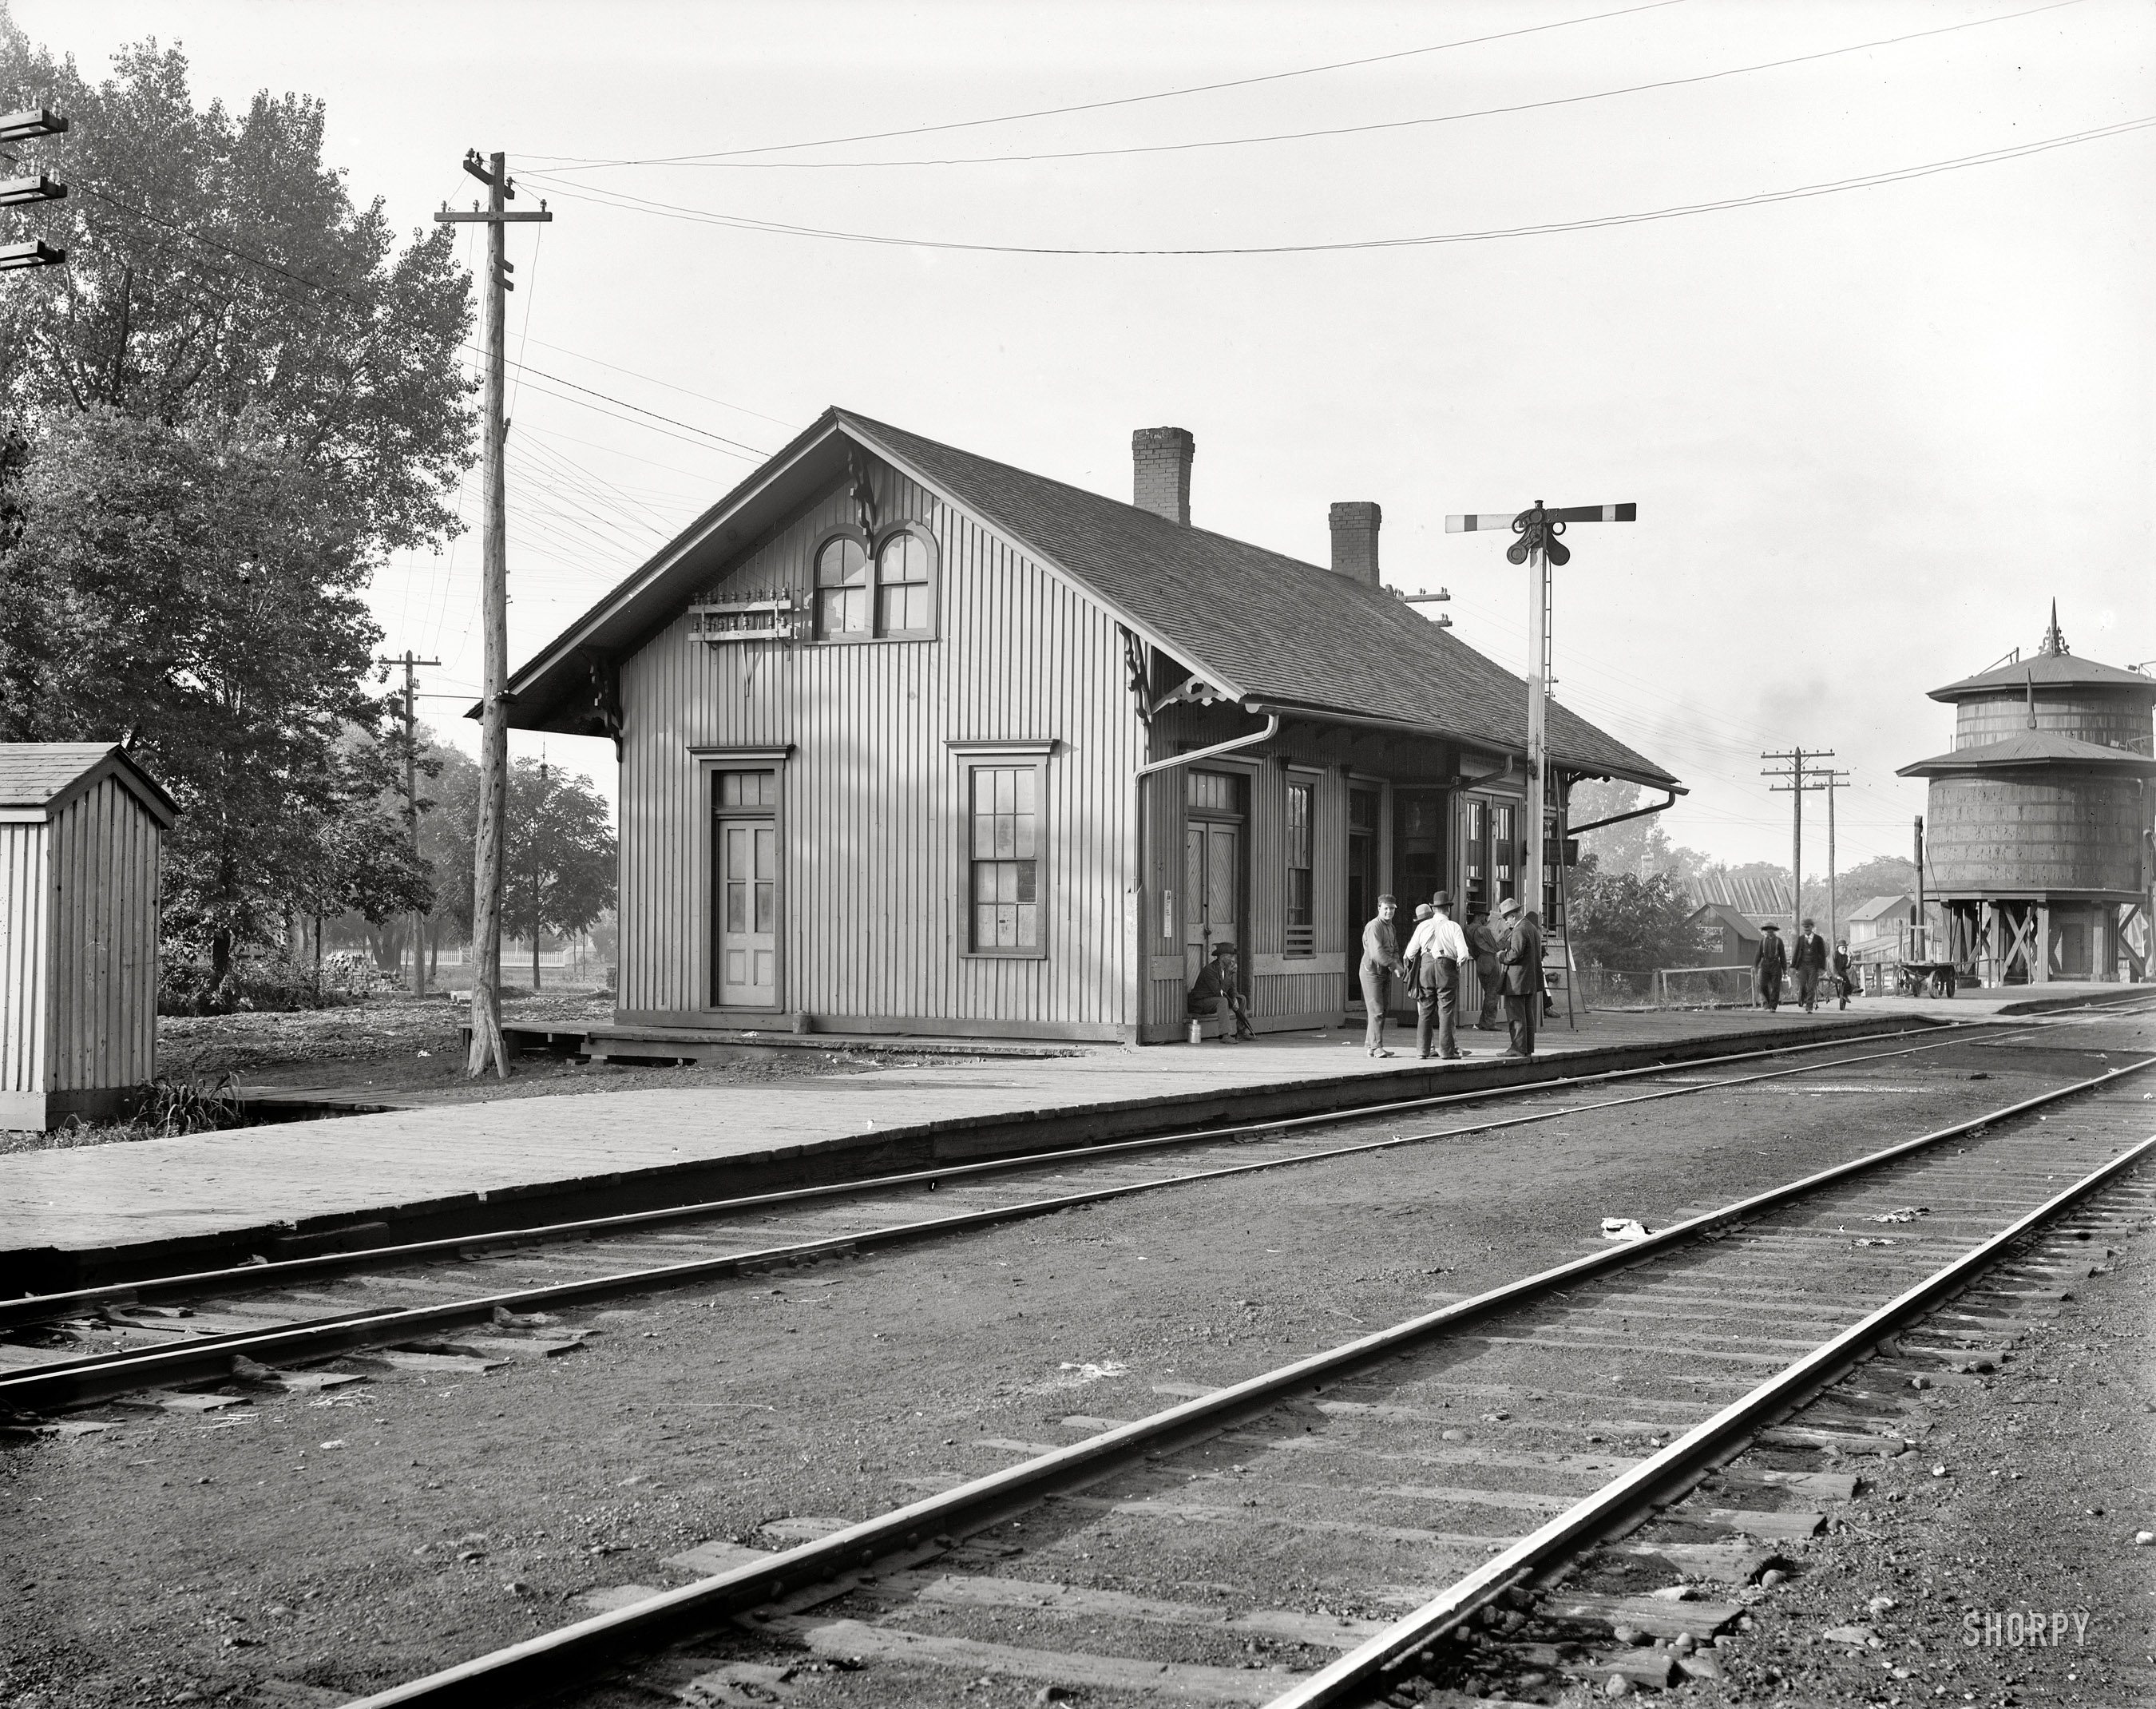 Circa 1905. "Railway station at Pontiac, Illinois." Next stop: Hooterville. 8x10 inch dry plate glass negative, Detroit Publishing Company. View full size.